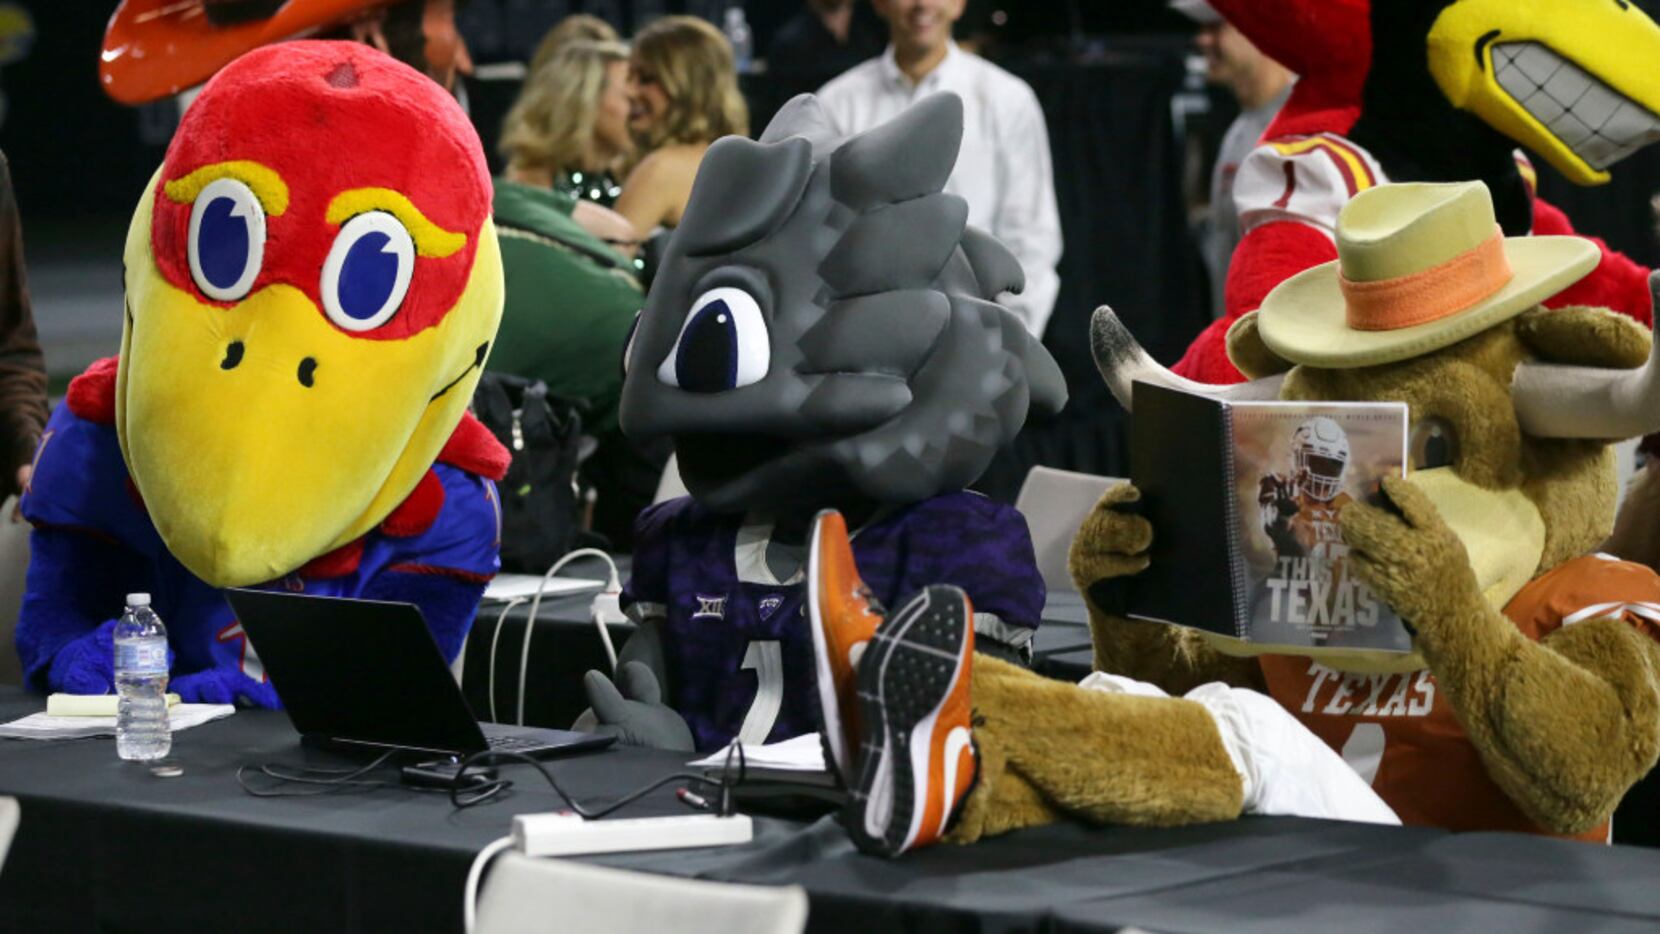 Team mascots for Kansas, TCU and Texas, from left, sit at desks for reporters before the...